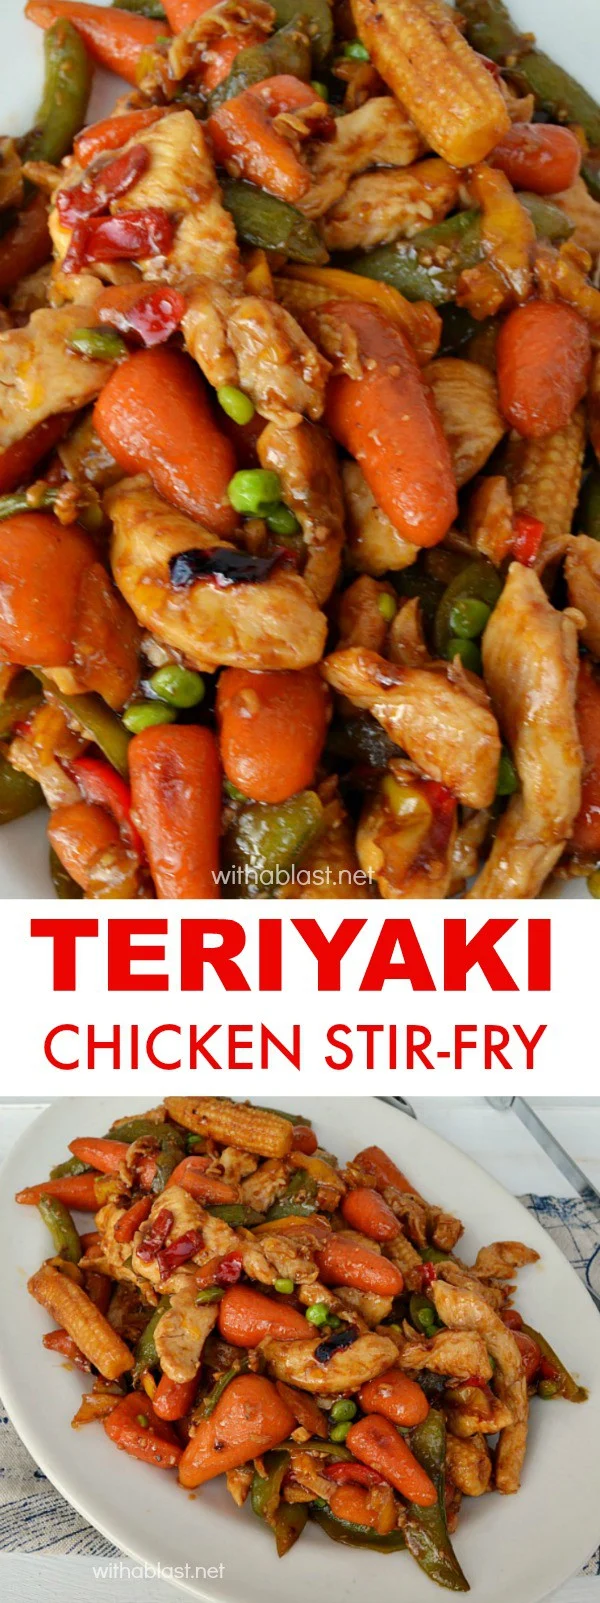 Teriyaki Chicken Stir-Fry is a quick, easy and perfect last minute dinner #ChickenRecipes #TeriyakiChicken #StirFryRecipes